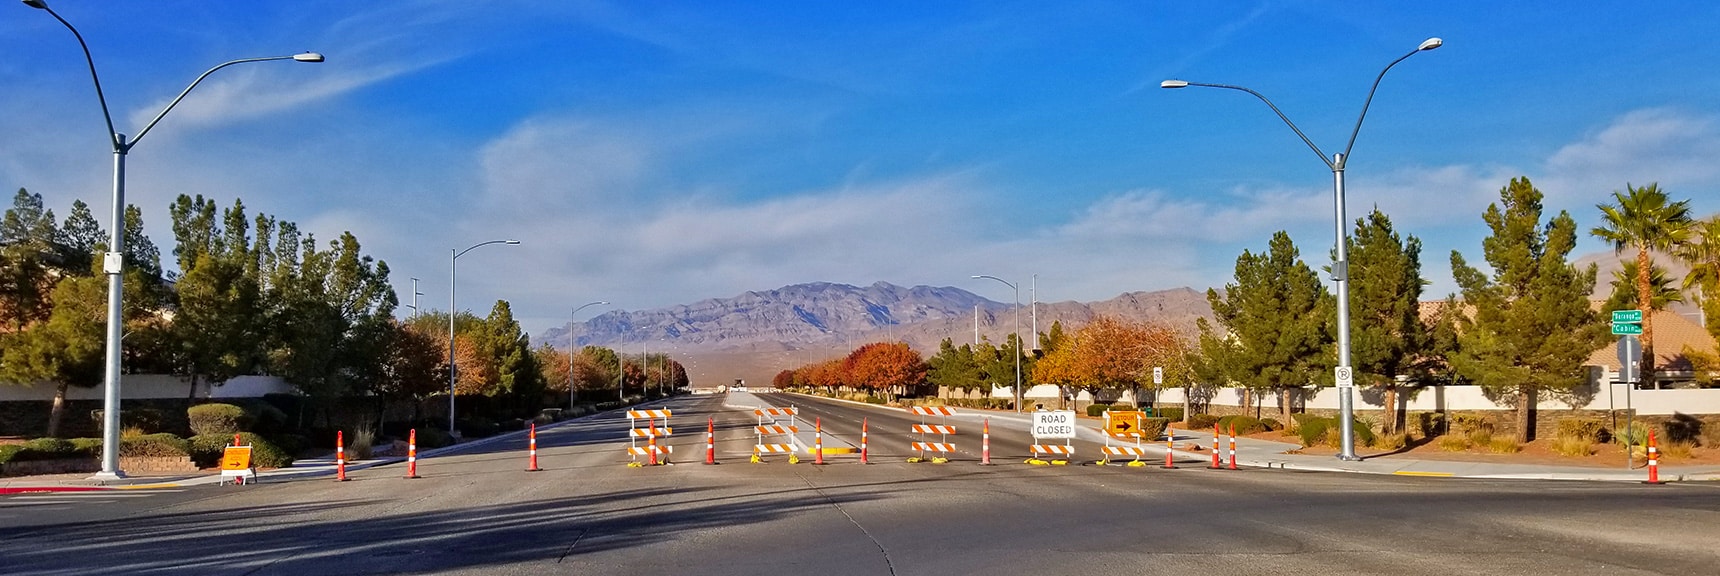 Blocked Off Northern Section of Durango, Construction Begins | Snapshot of Las Vegas Northern Growth Edge on January 3, 2021